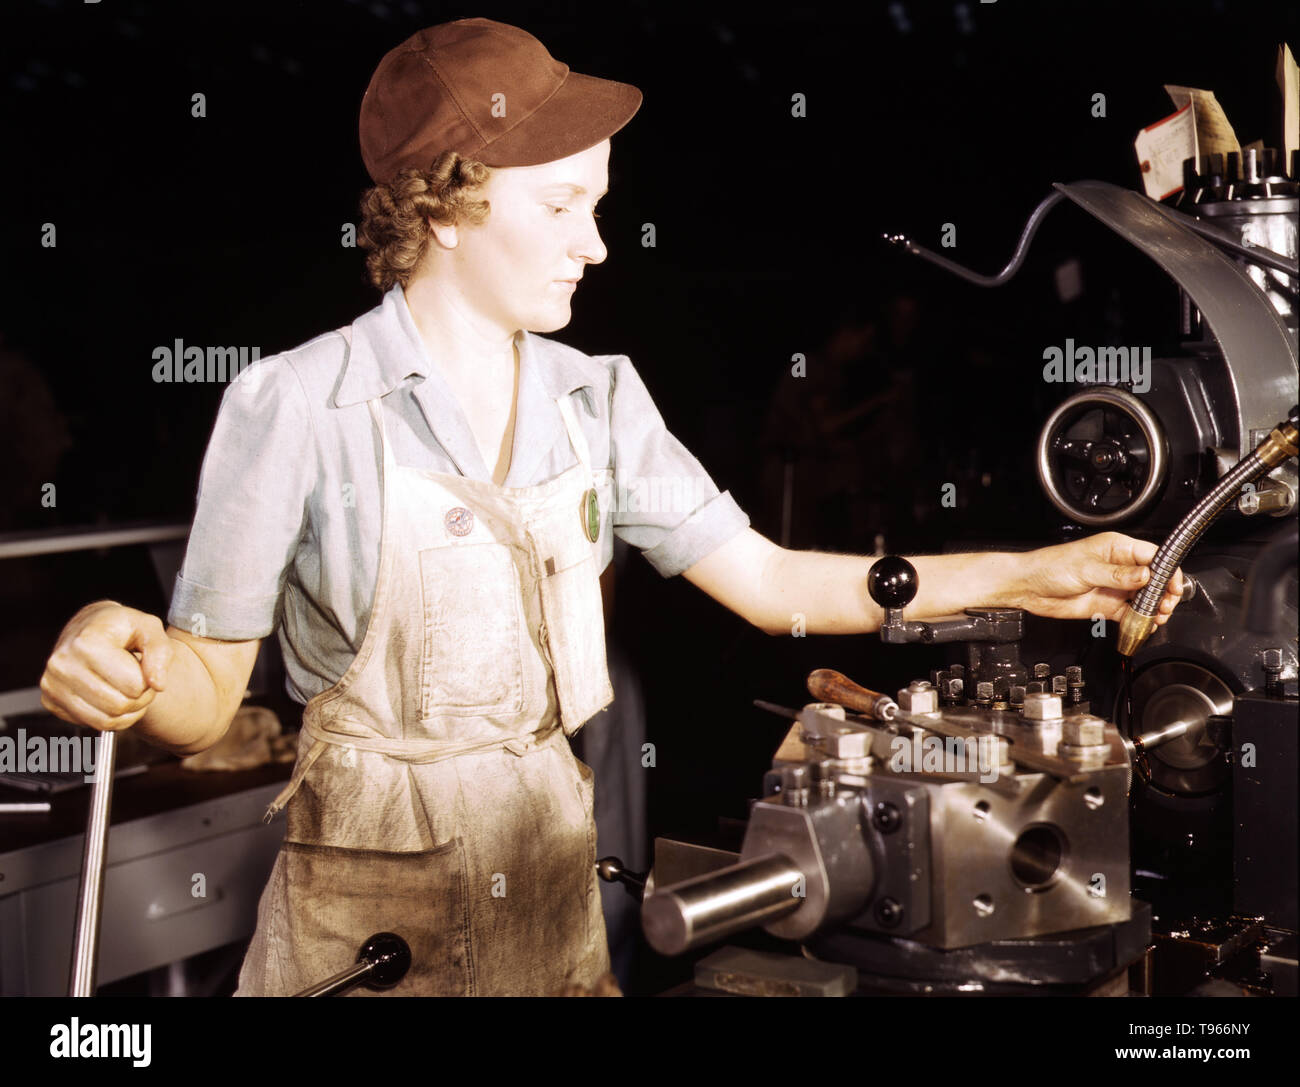 Beulah Faith, 20, used to be sales clerk in department store, reaming tools for transport on lathe machine, Consolidated Aircraft Corp., Fort Worth, Texas. Although the image of 'Rosie the Riveter' reflected the industrial work of welders and riveters, the majority of working women filled non-factory positions in every sector of the economy. What unified the experiences of these women was that they proved to themselves, and the country, that they could do a man's job and could do it well. Photographed by Howard R. Hollem, 1942. Stock Photo